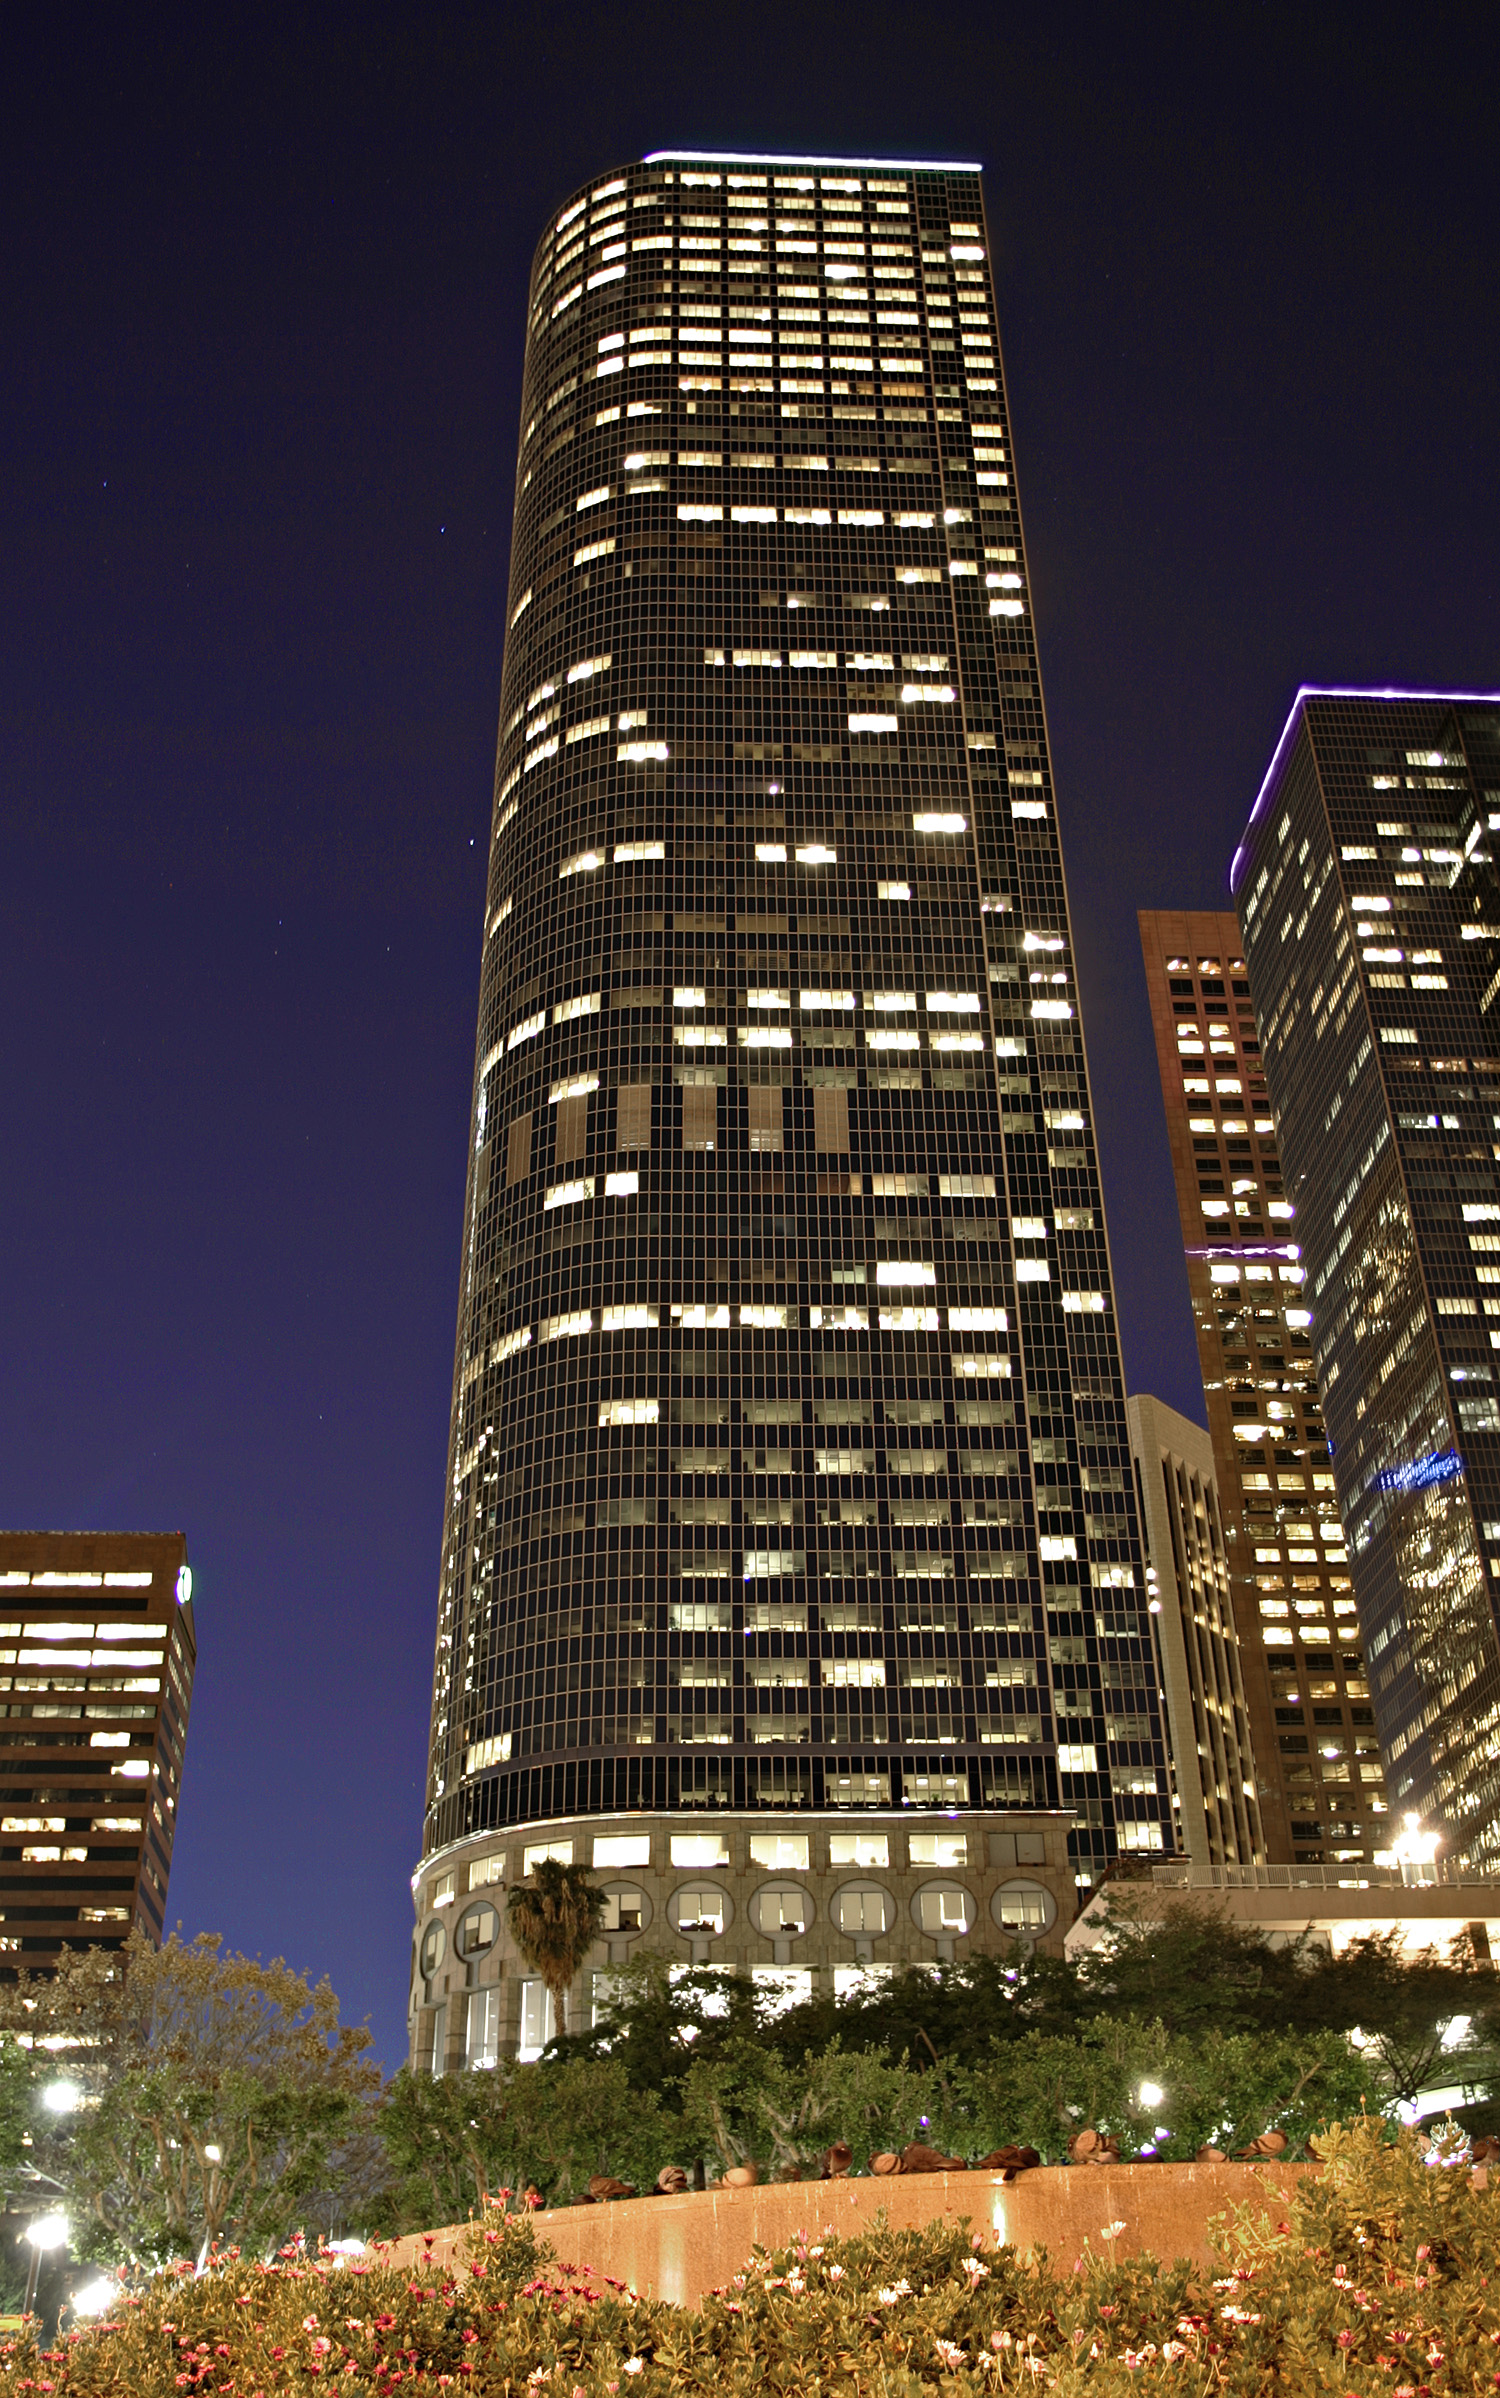 Two California Plaza, Los Angeles - Night view from South Hill Street. © Mathias Beinling